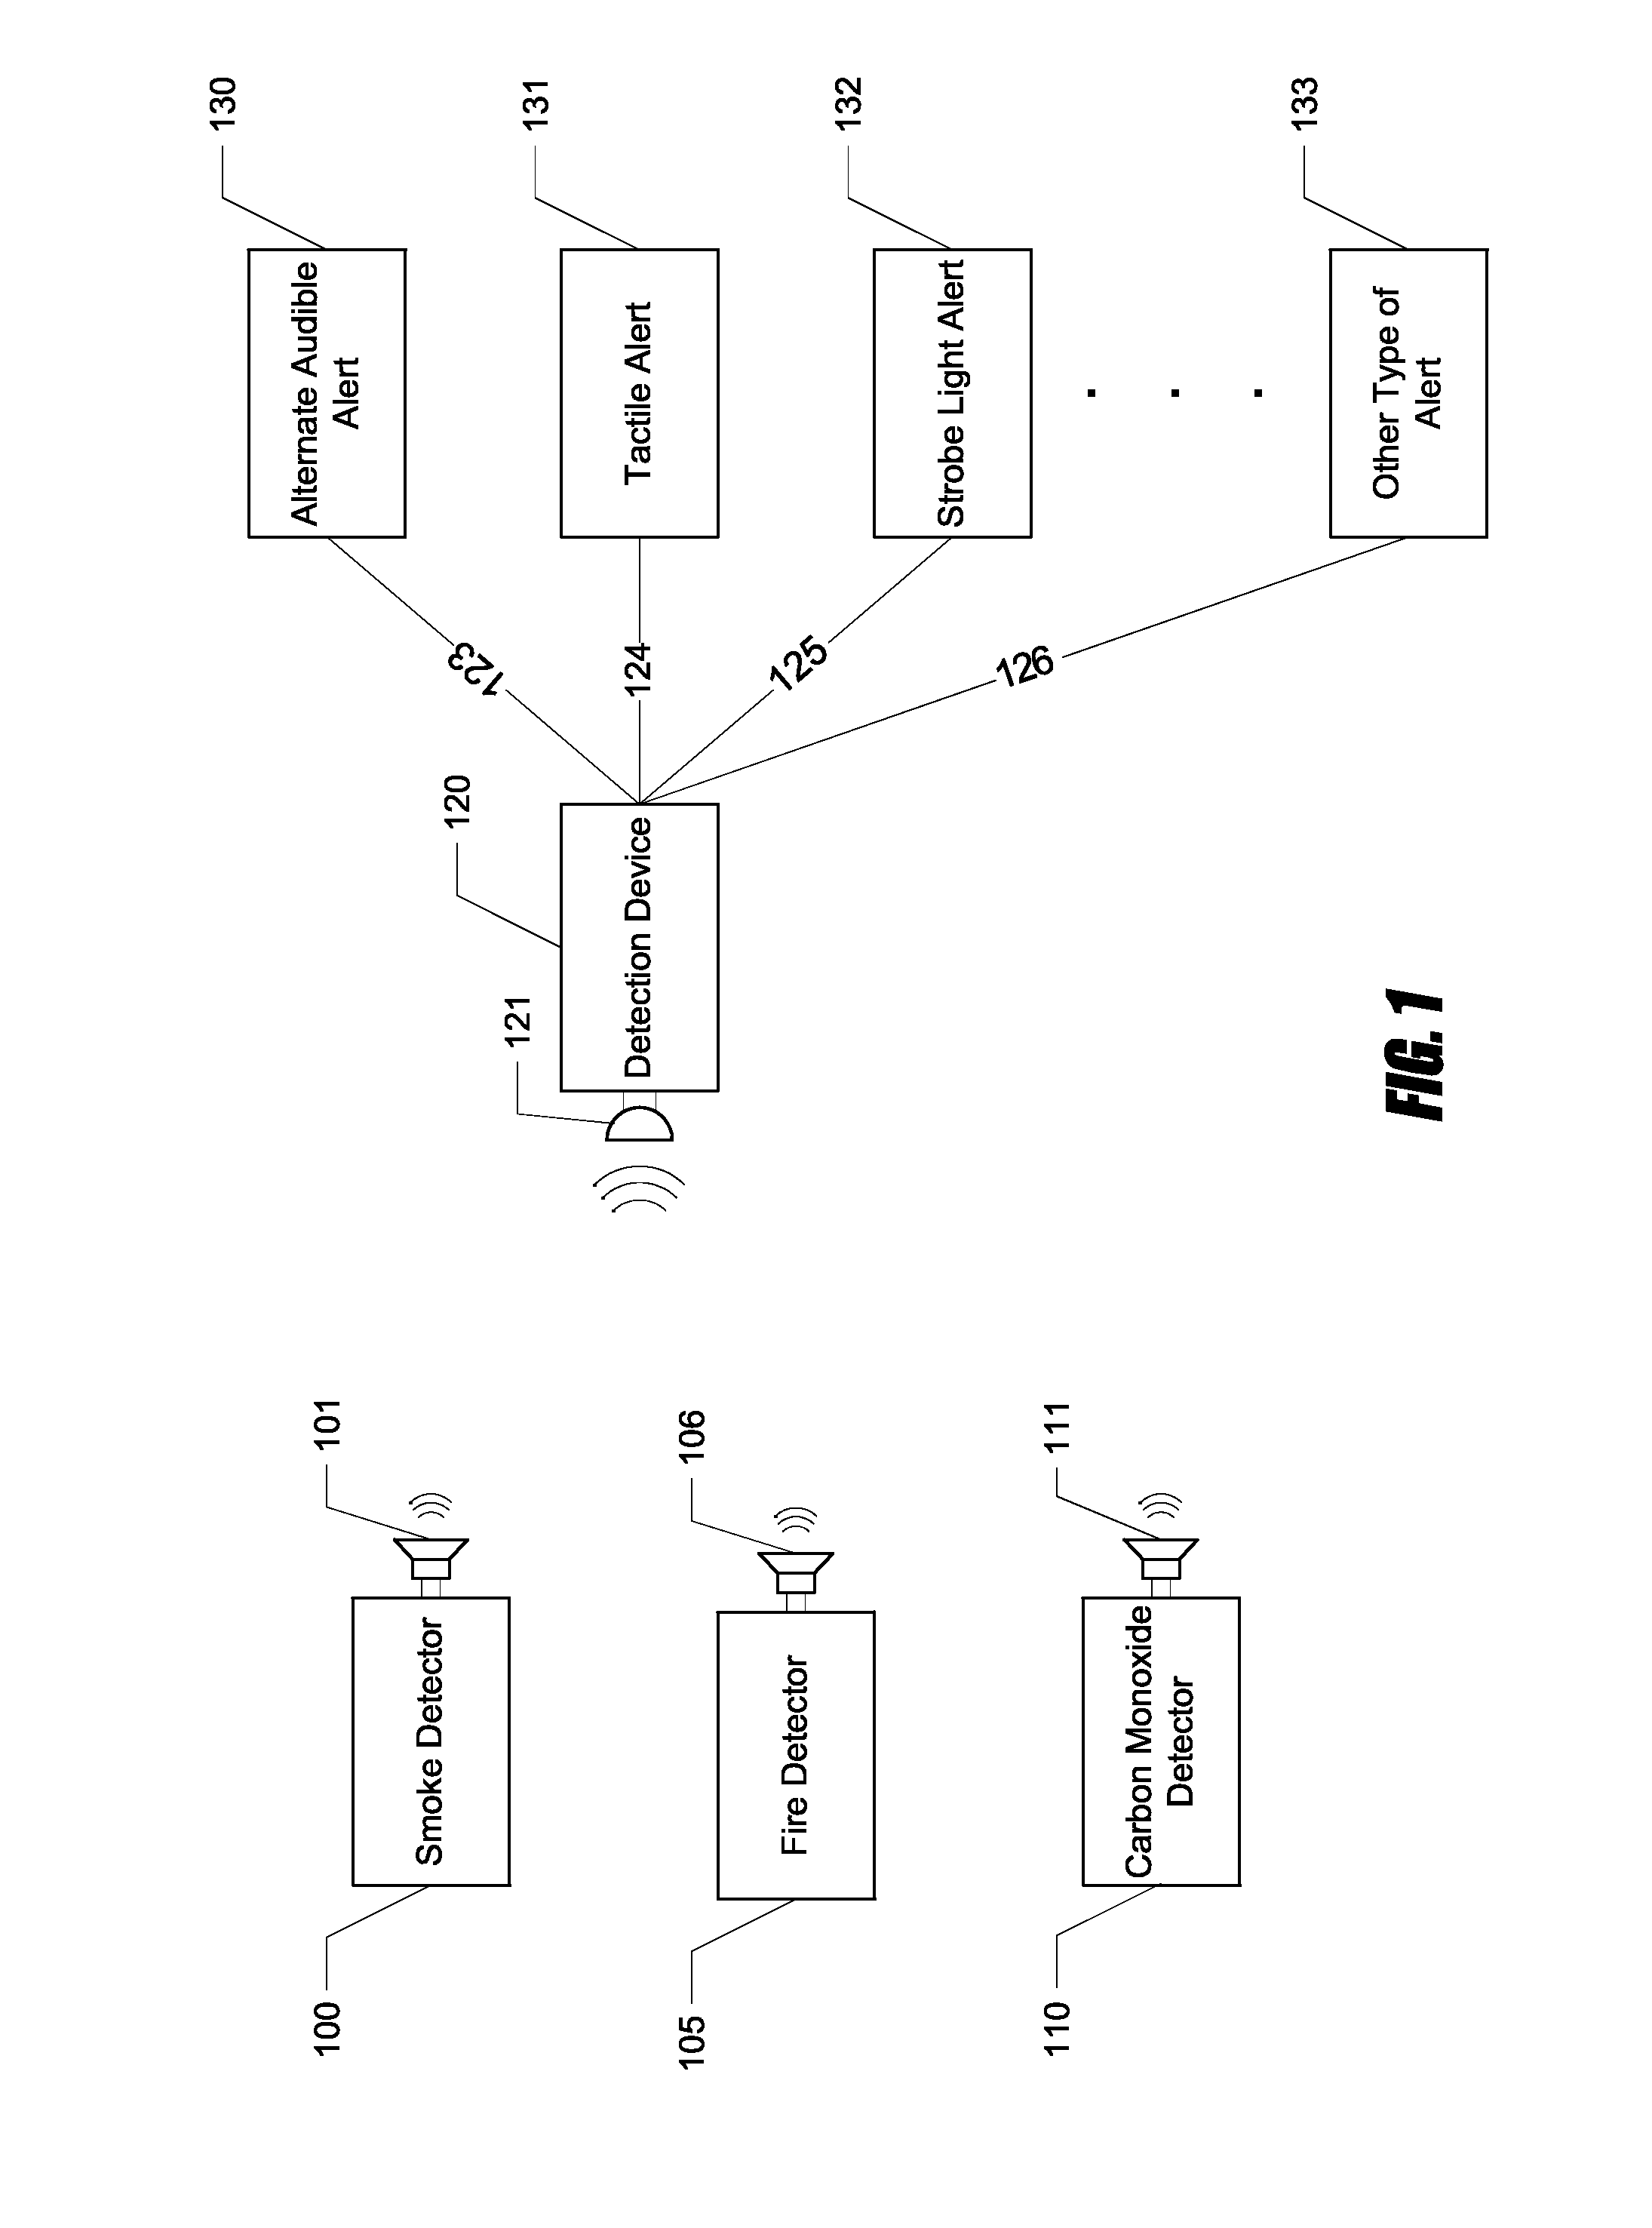 Signal processing system and methods for reliably detecting audible alarms